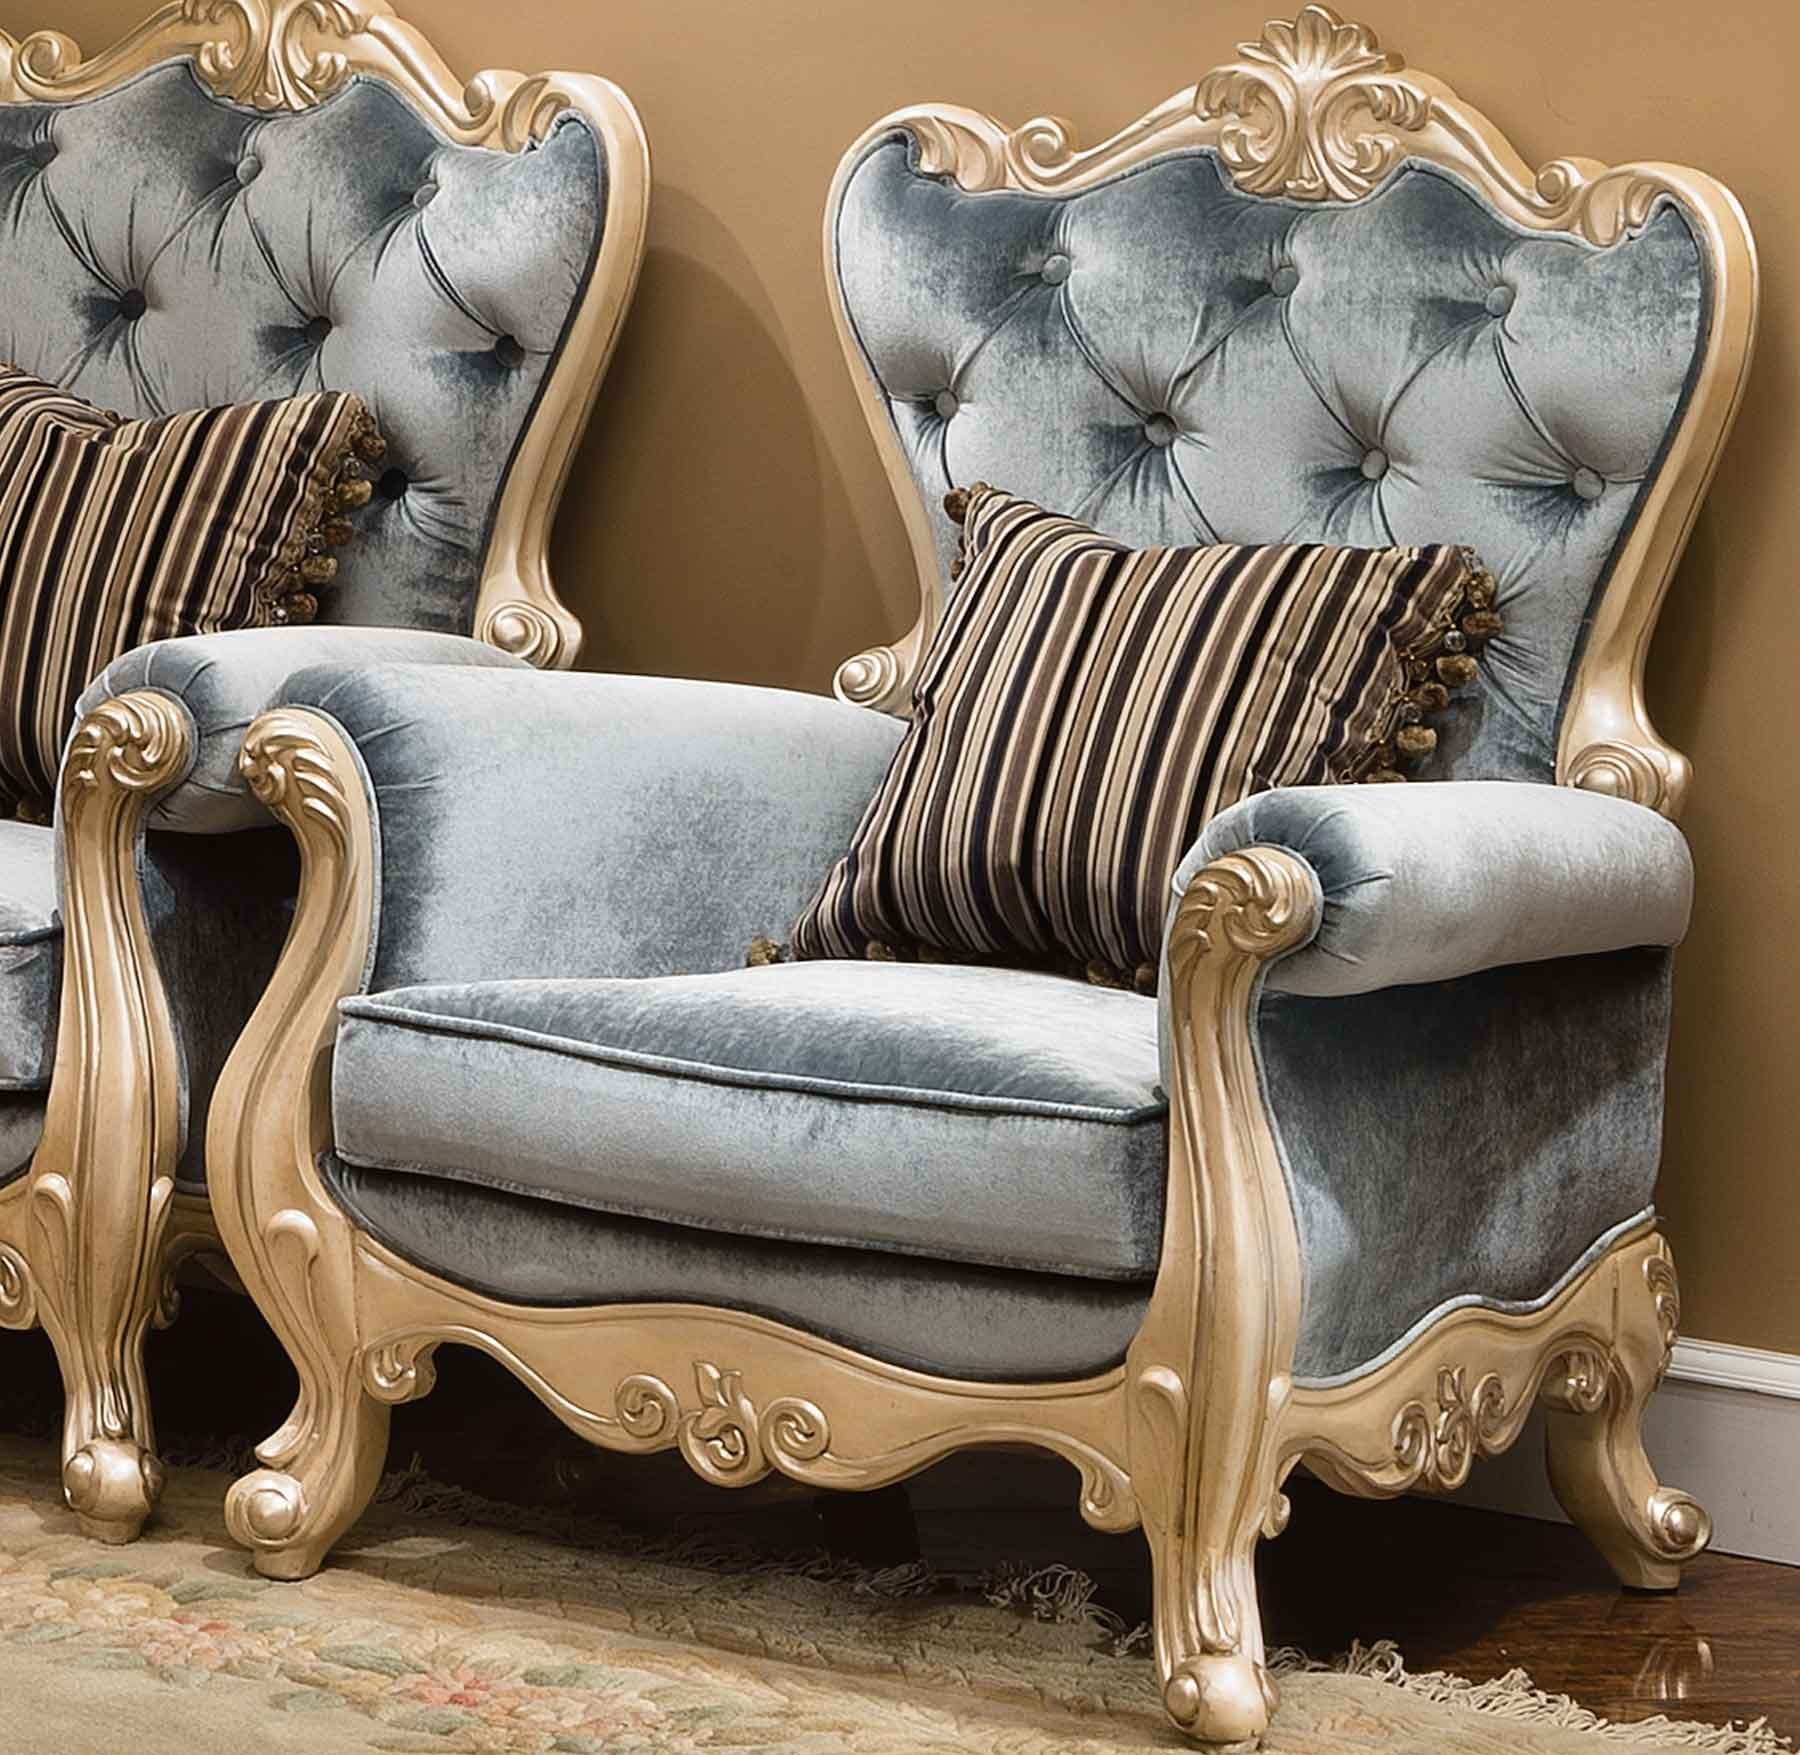 St. Ives Accent Chair shown in Egyptian Pearl finish